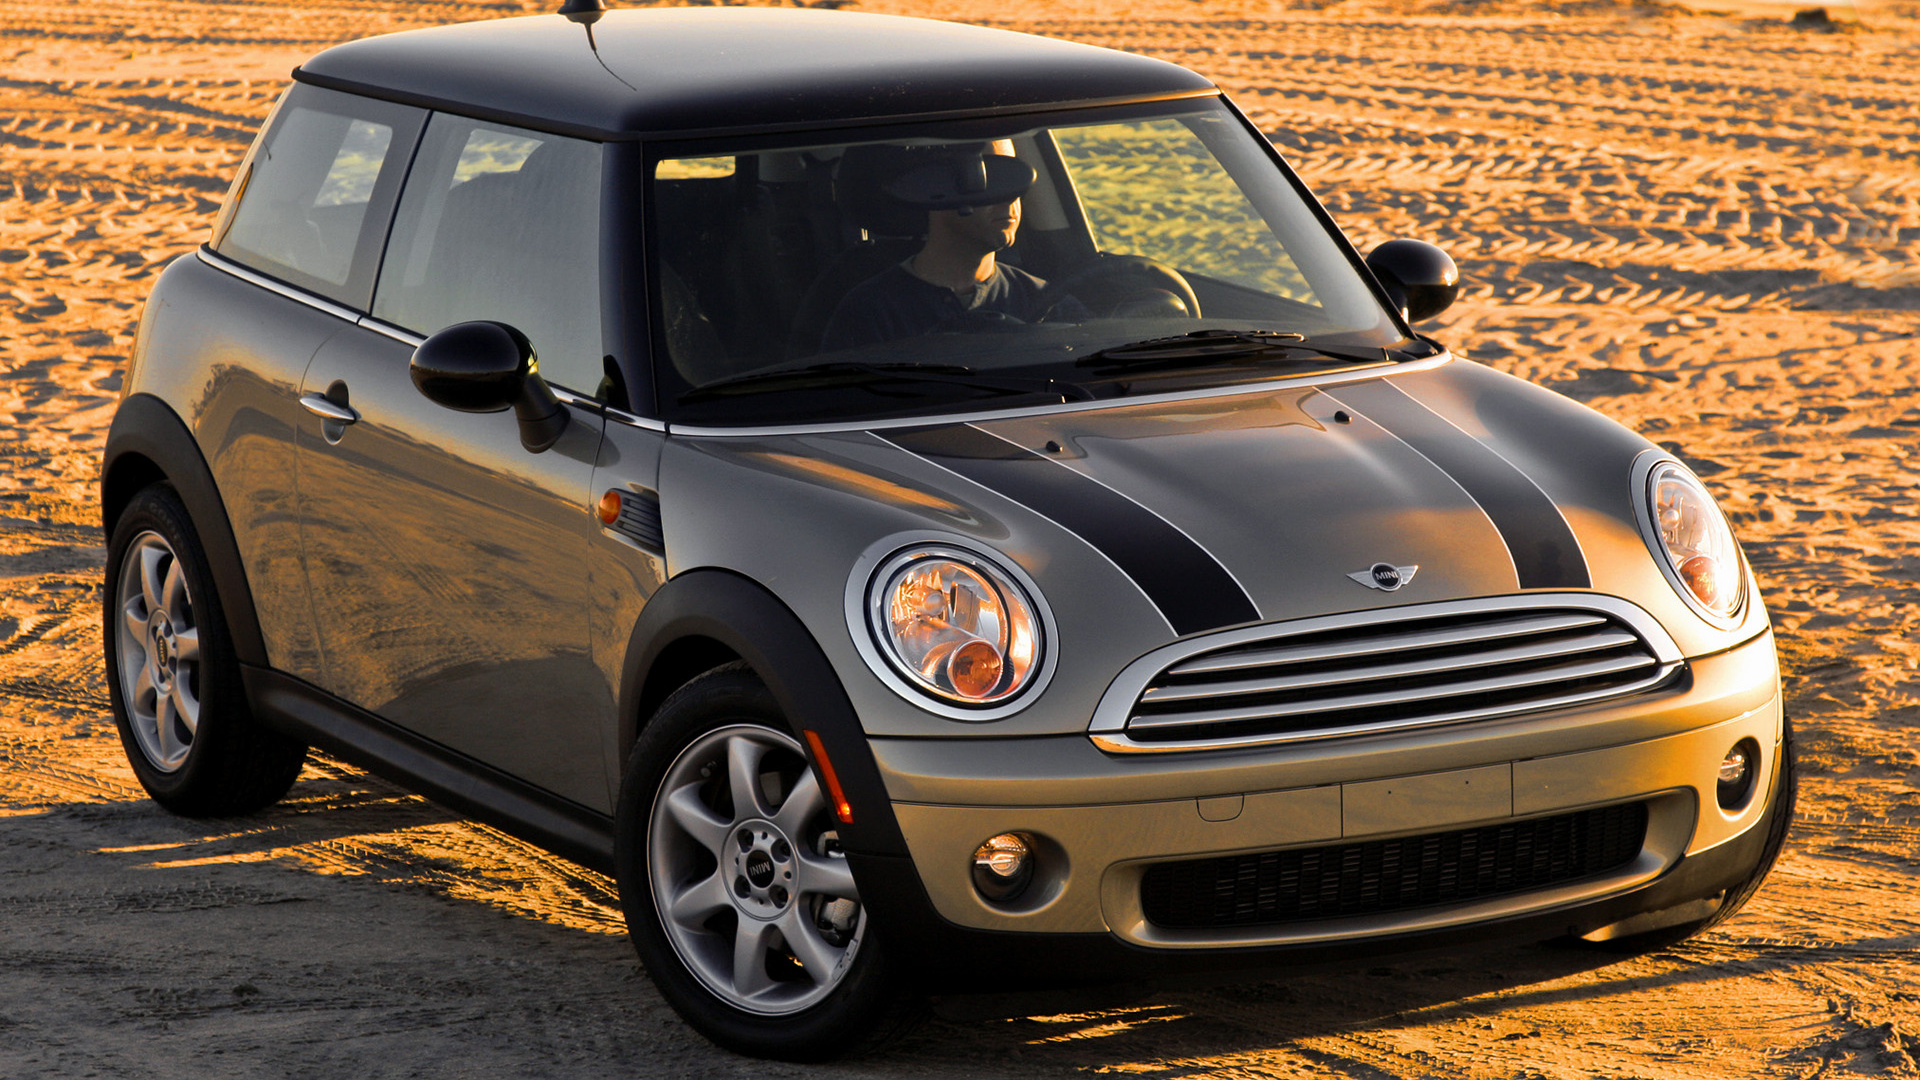 2006 Mini Cooper (US) - Wallpapers and HD Images | Car Pixel